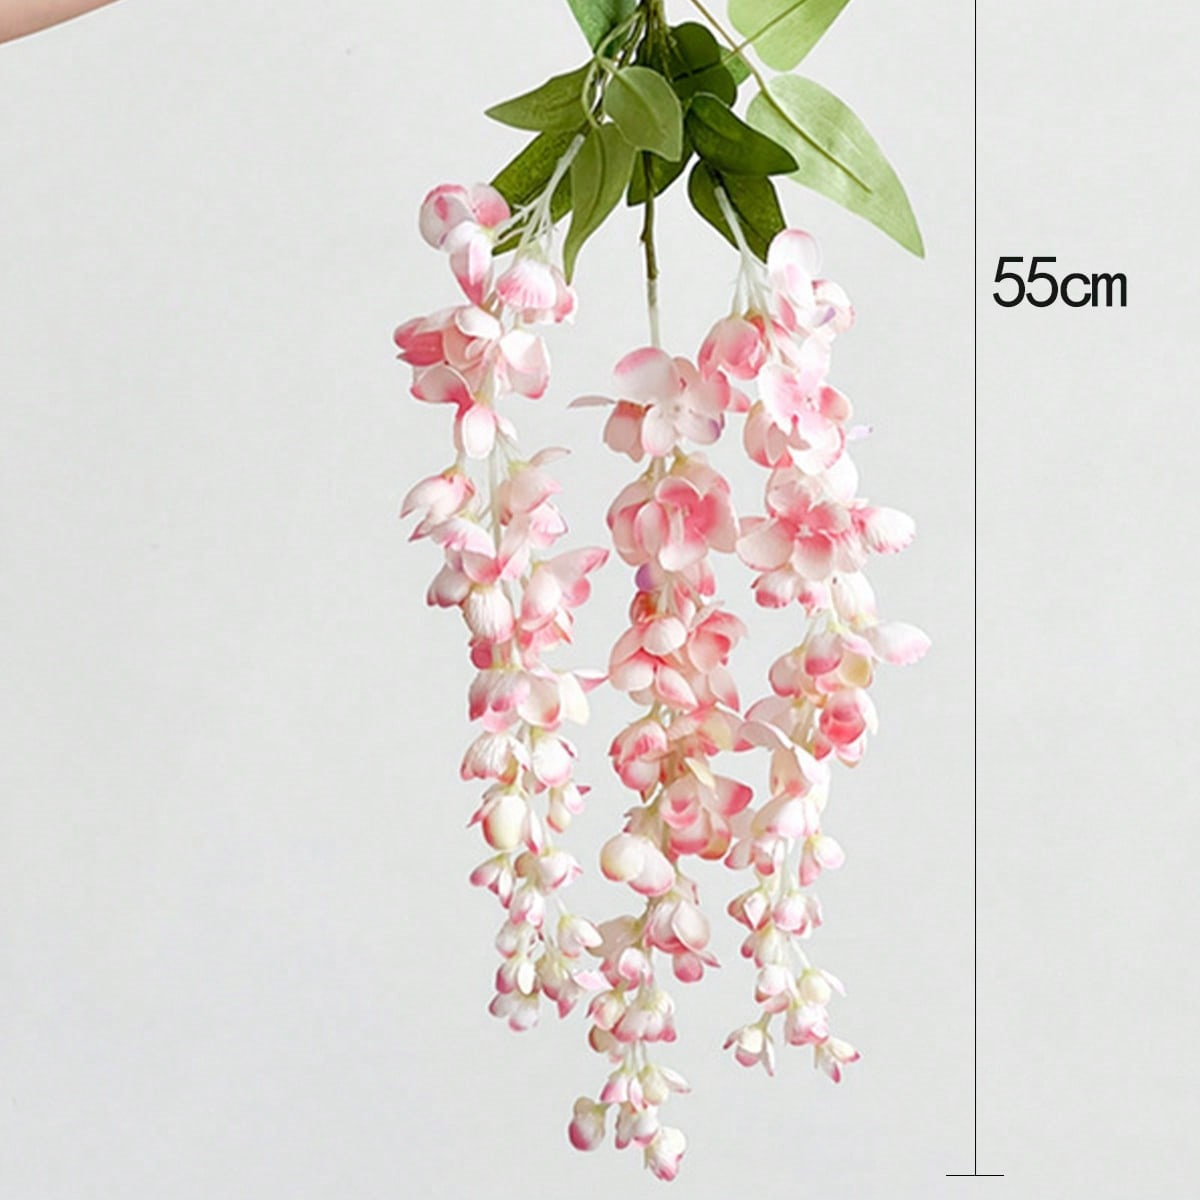 

3 Pcs Artificial Fake Wisteria Hanging Flowers 55cm/21.6in Wisteria Faux Flowers Garland Silk Wisteria Vine Rattan For Home Outdoor Wedding Party